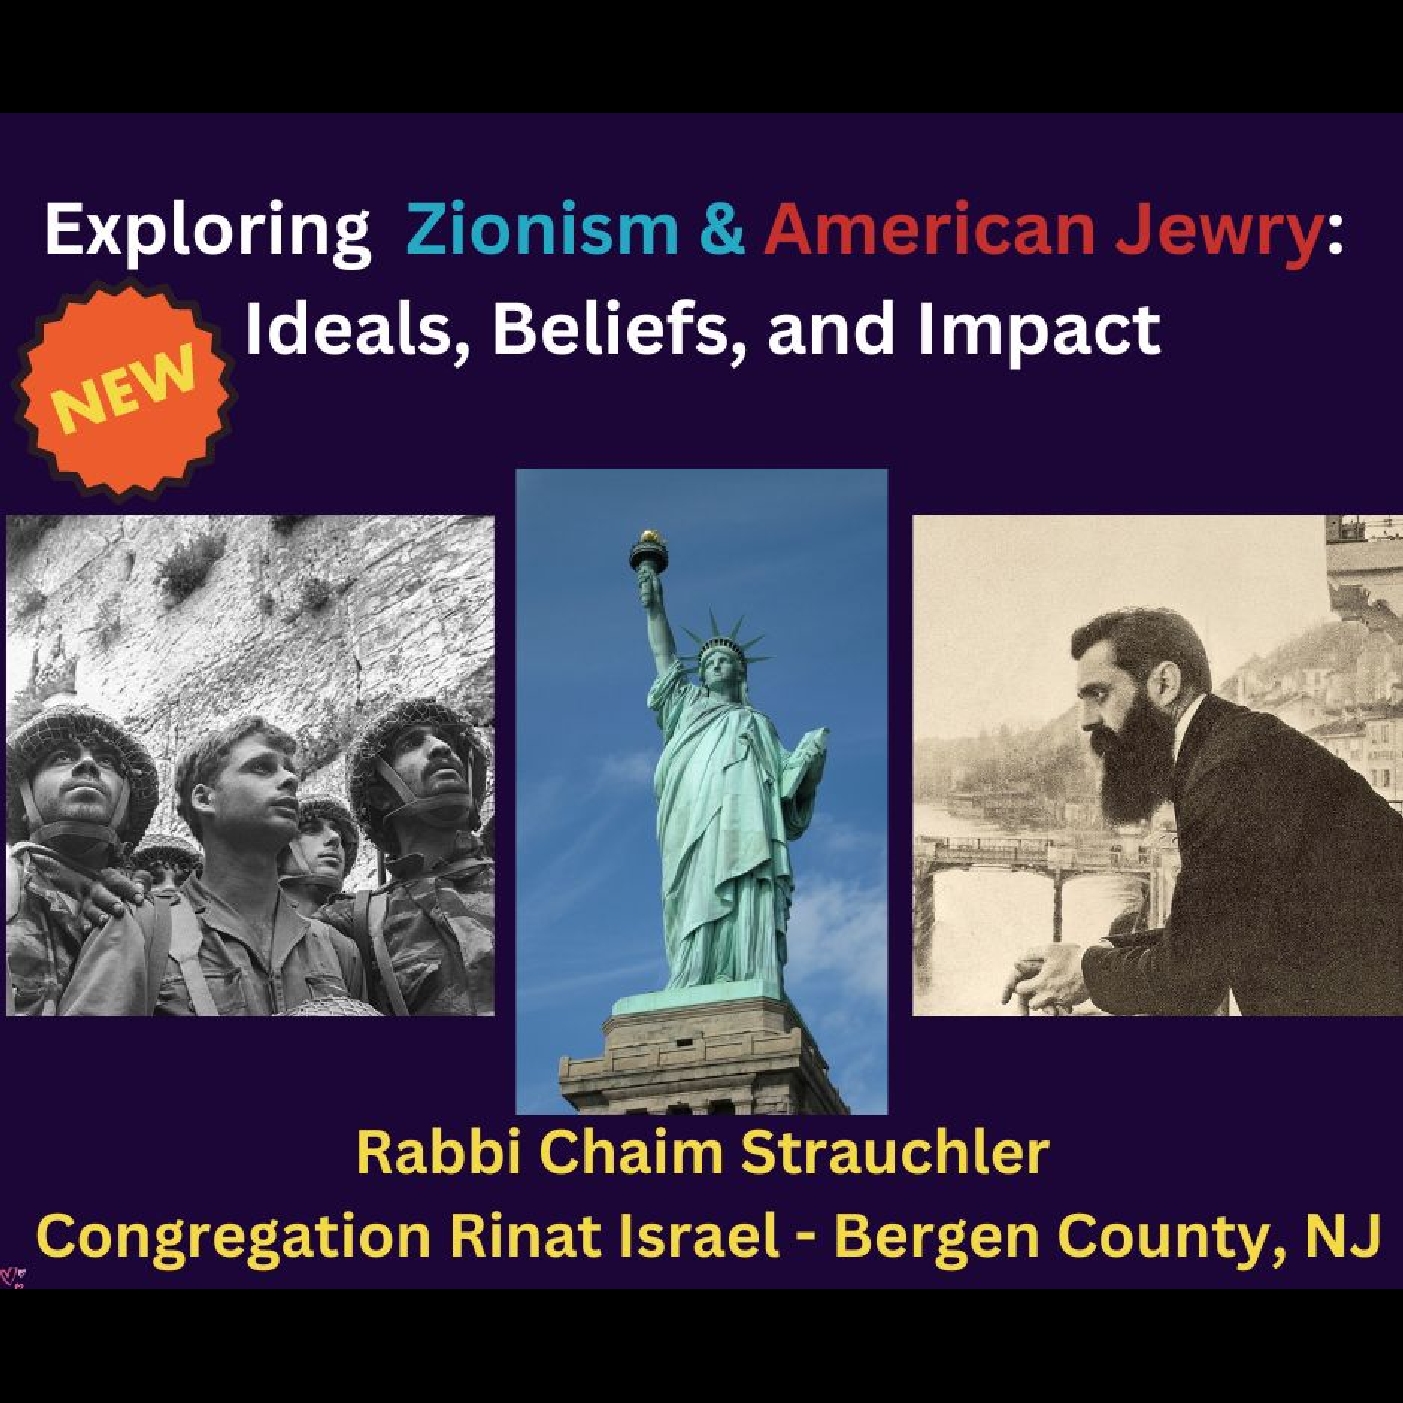 Exploring Zionism & American Jewry: Ideals, Beliefs and Impact - Rabbi Chaim Strauchler